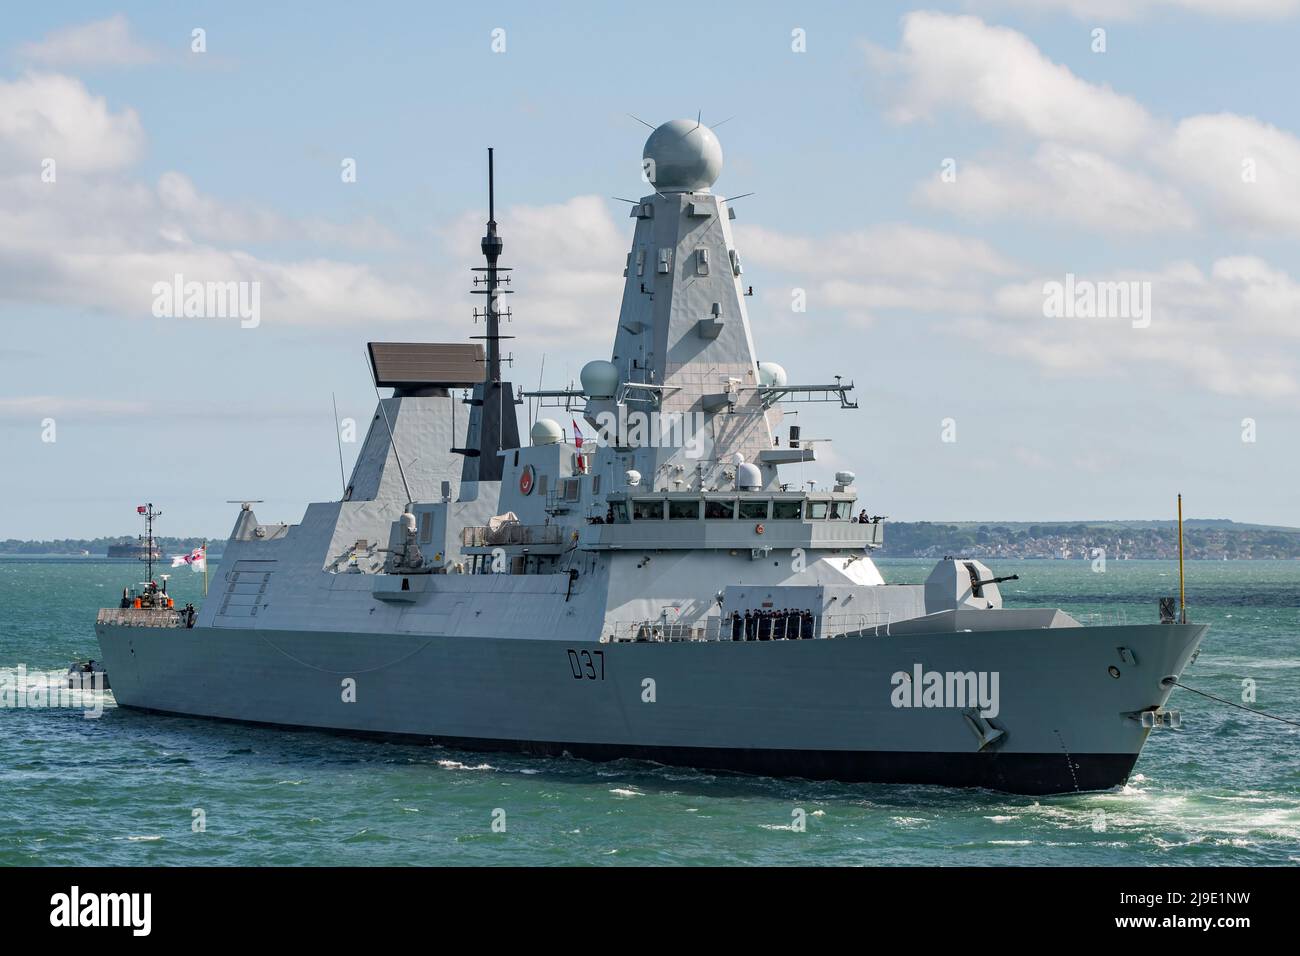 The Royal Navy Type 45 air defence destroyer HMS Duncan (D37) returned to Portsmouth, UK on 20/5/2022 after post refit sea trials. Stock Photo